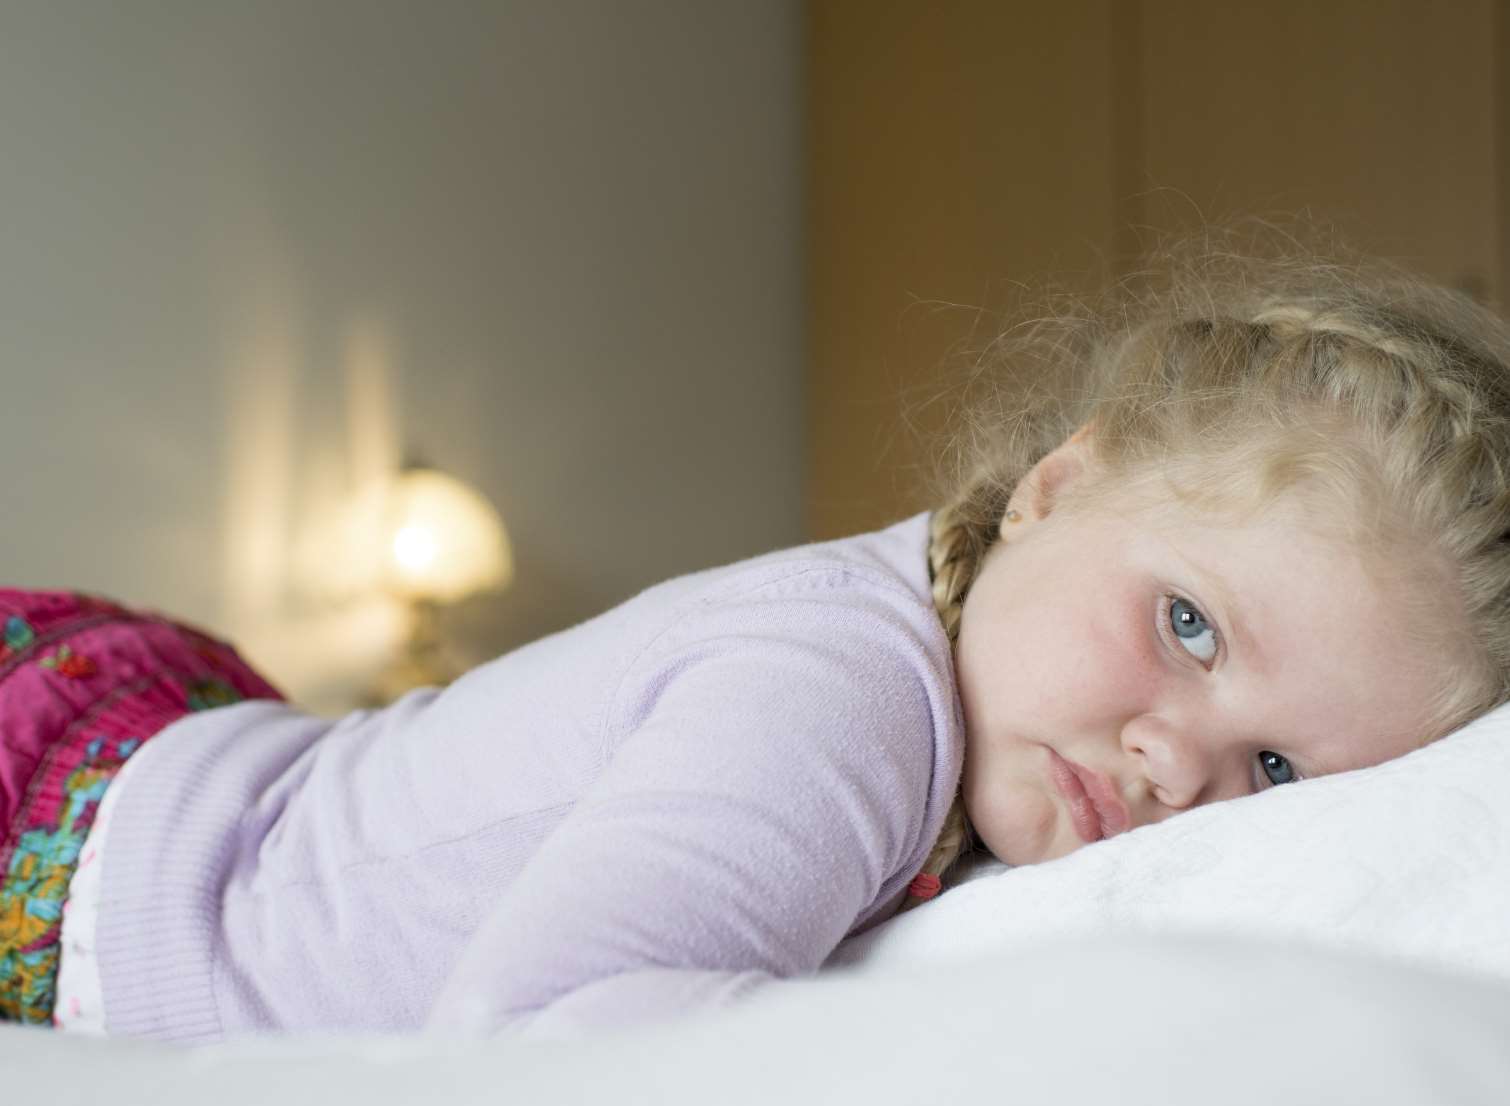 Between 5% to 10% of seven-year-olds regularly wet their beds